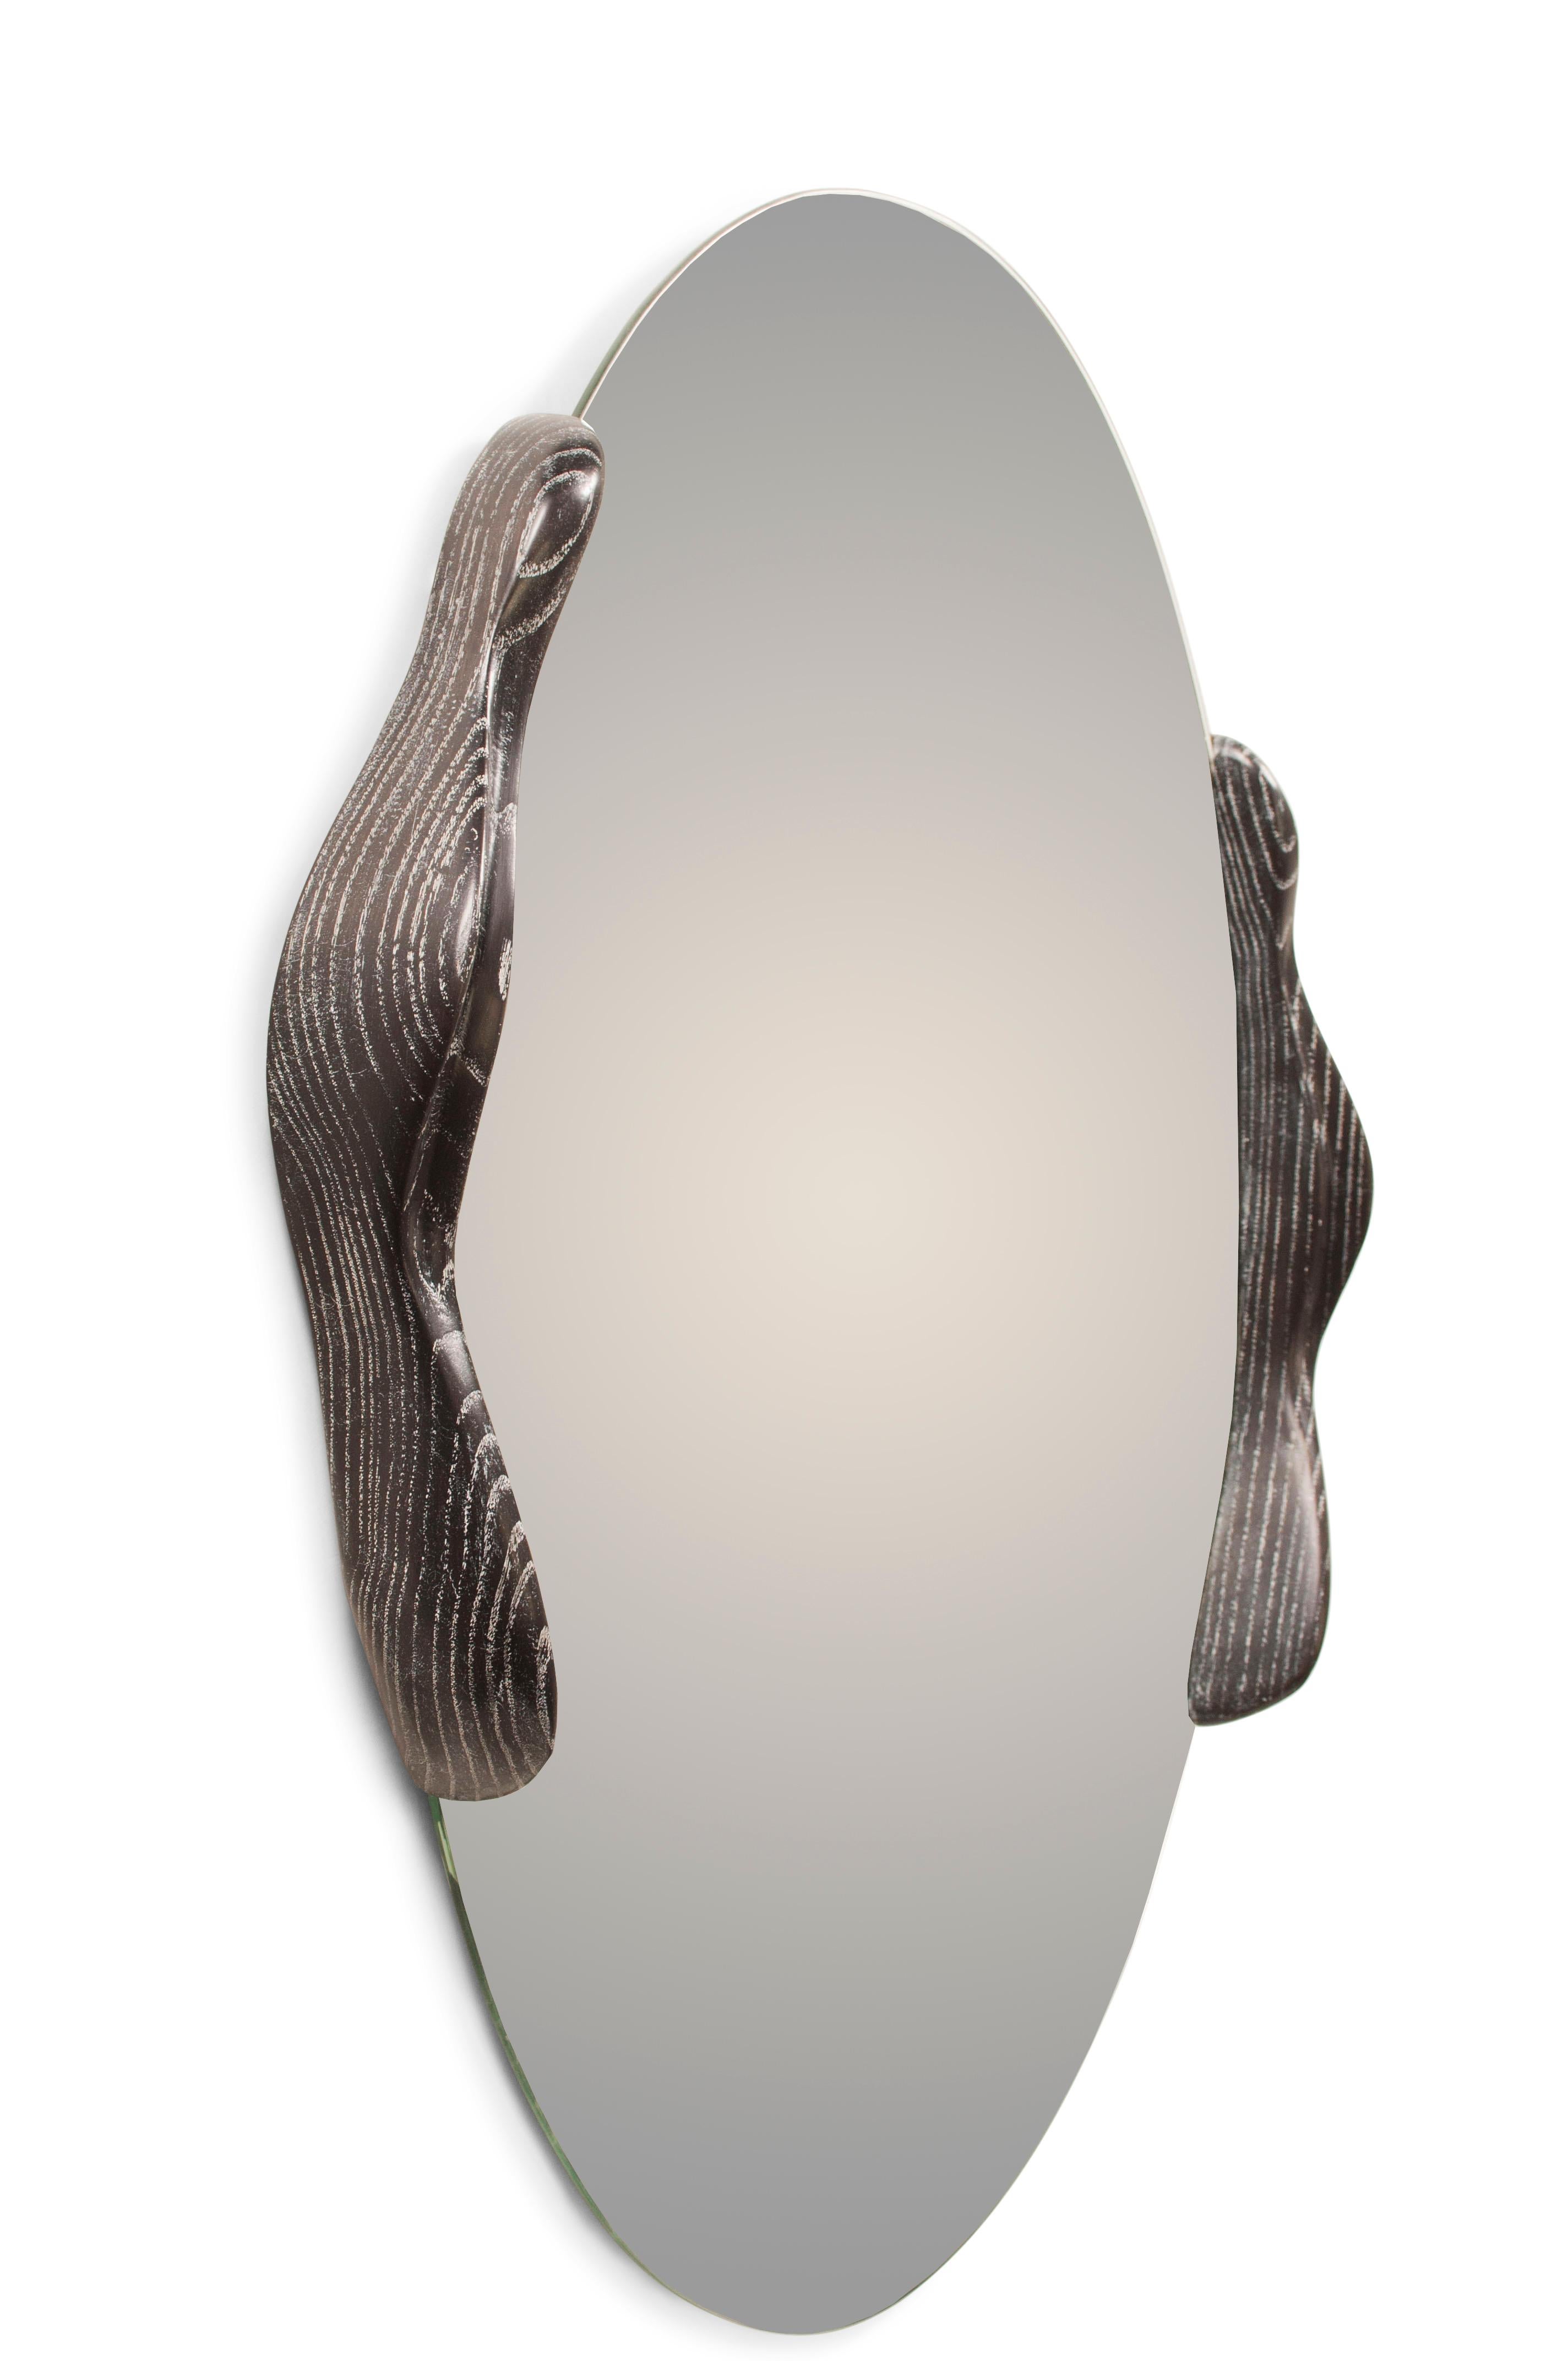 Oval shaped mirror with ash wood stained desert night, designed and manufactured by Amorph.
Mirror thickness 1/4